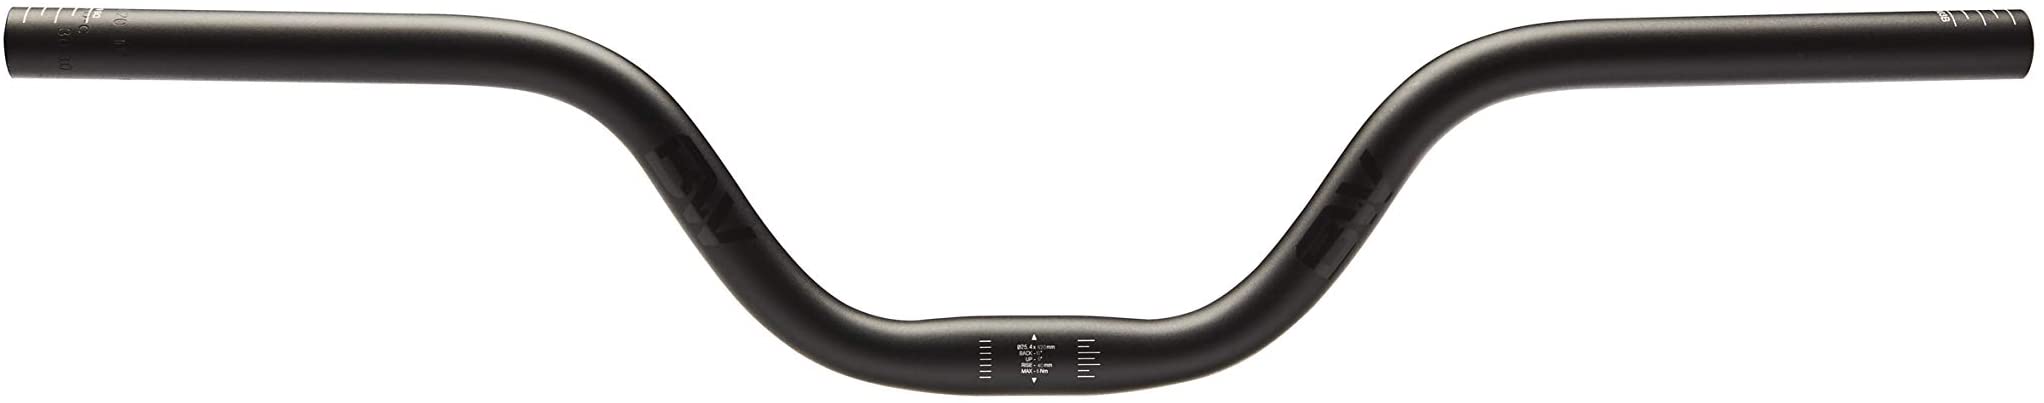 BW Riser Handlebar - Great for Mountain, Road, and Hybrid Bikes - Fits 25.4mm Stems - Multiple Rise Options